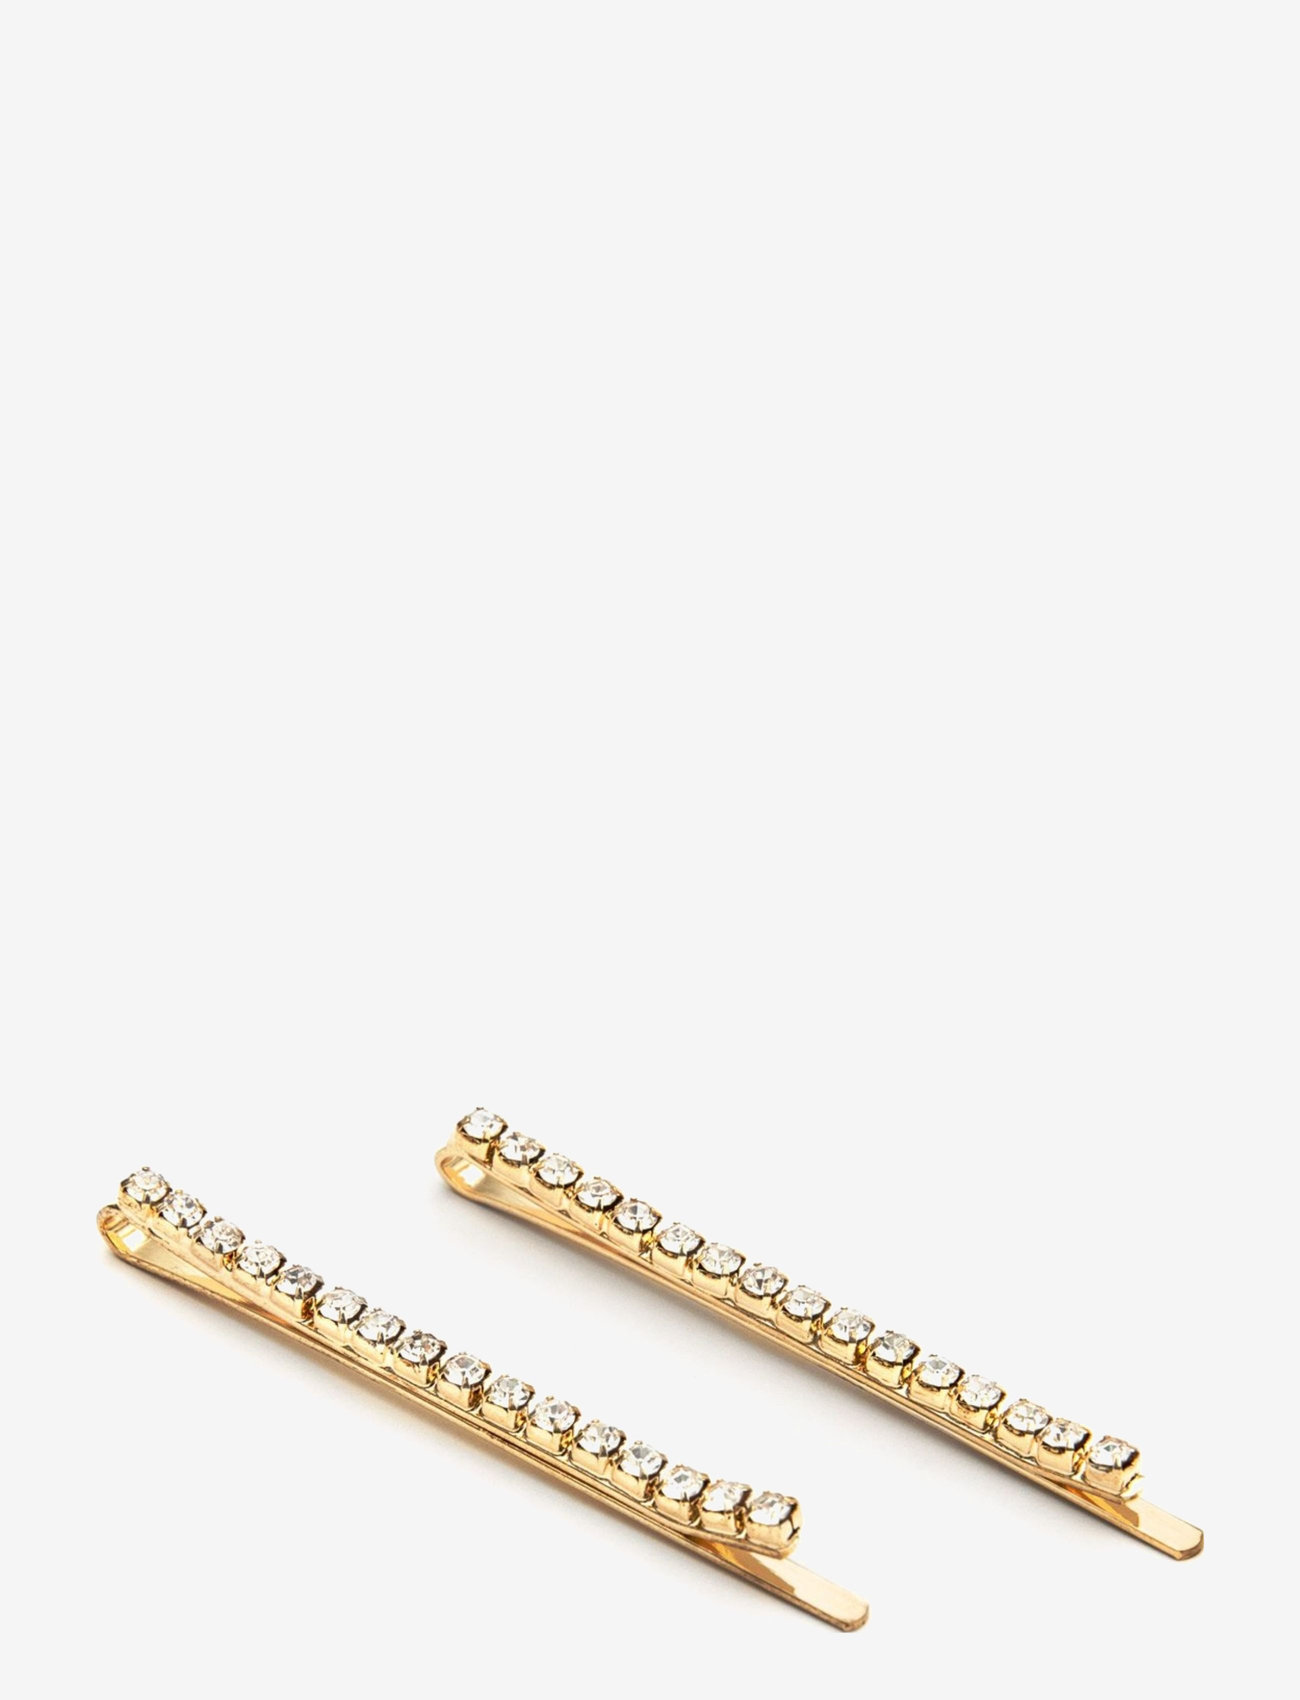 By Barb - Hair pin - lowest prices - goldmetal with white stones - 0